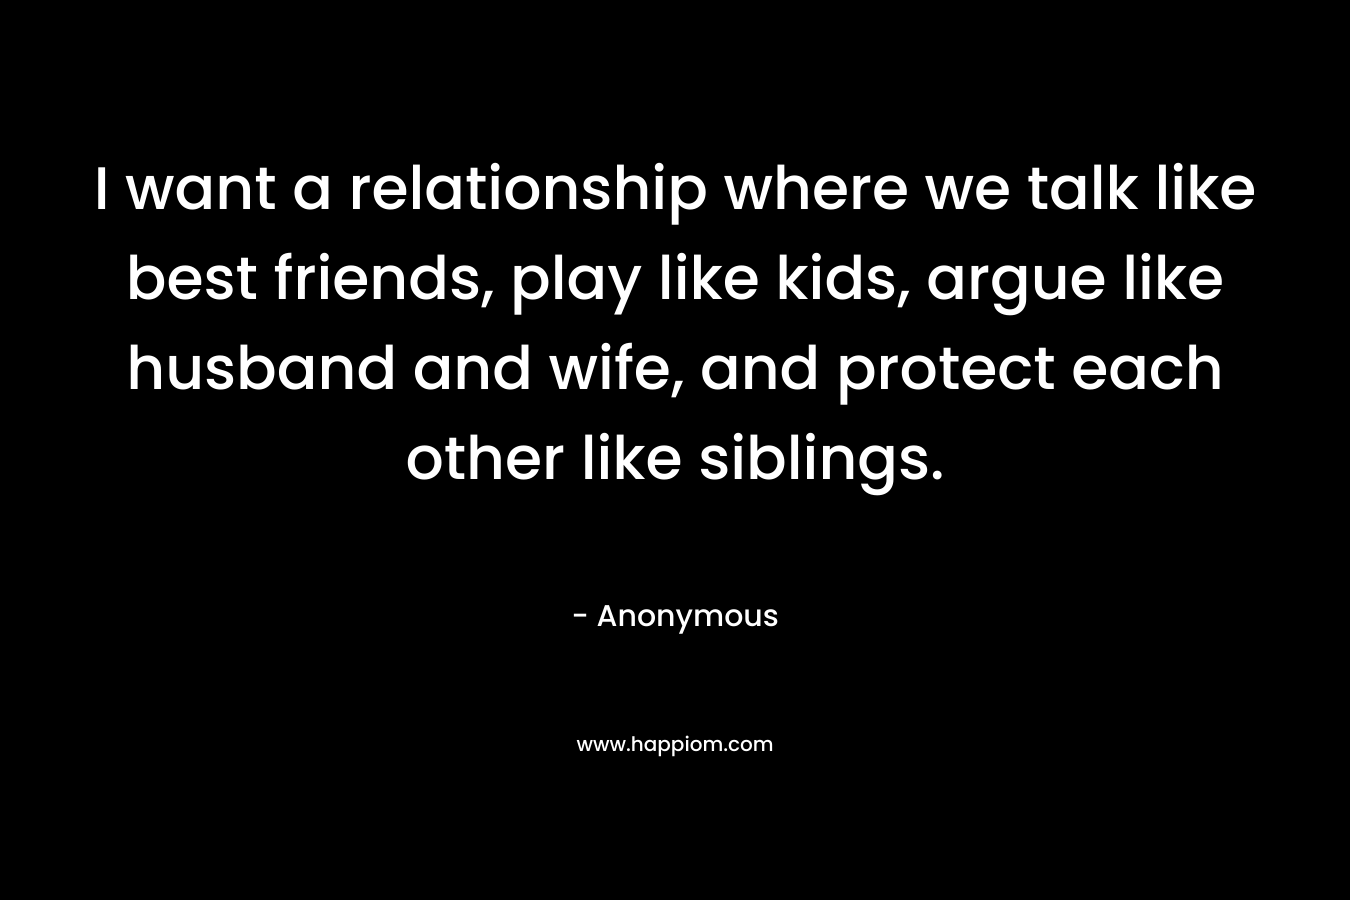 I want a relationship where we talk like best friends, play like kids, argue like husband and wife, and protect each other like siblings. – Anonymous